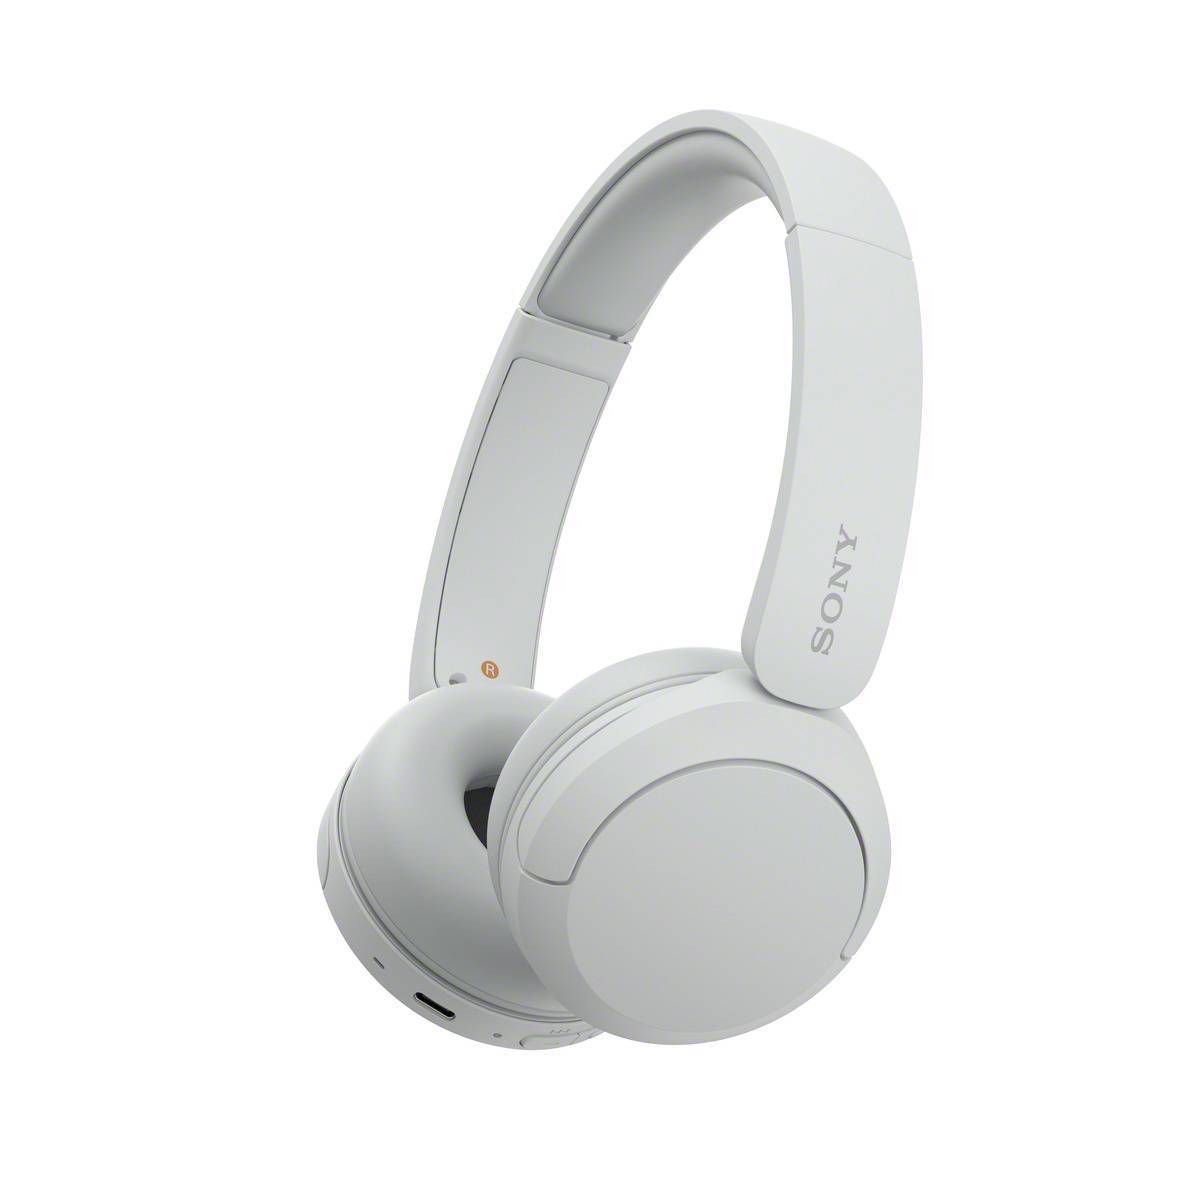 Sony WHCH520/B Bluetooth Wireless Headphones with Microphone | Target